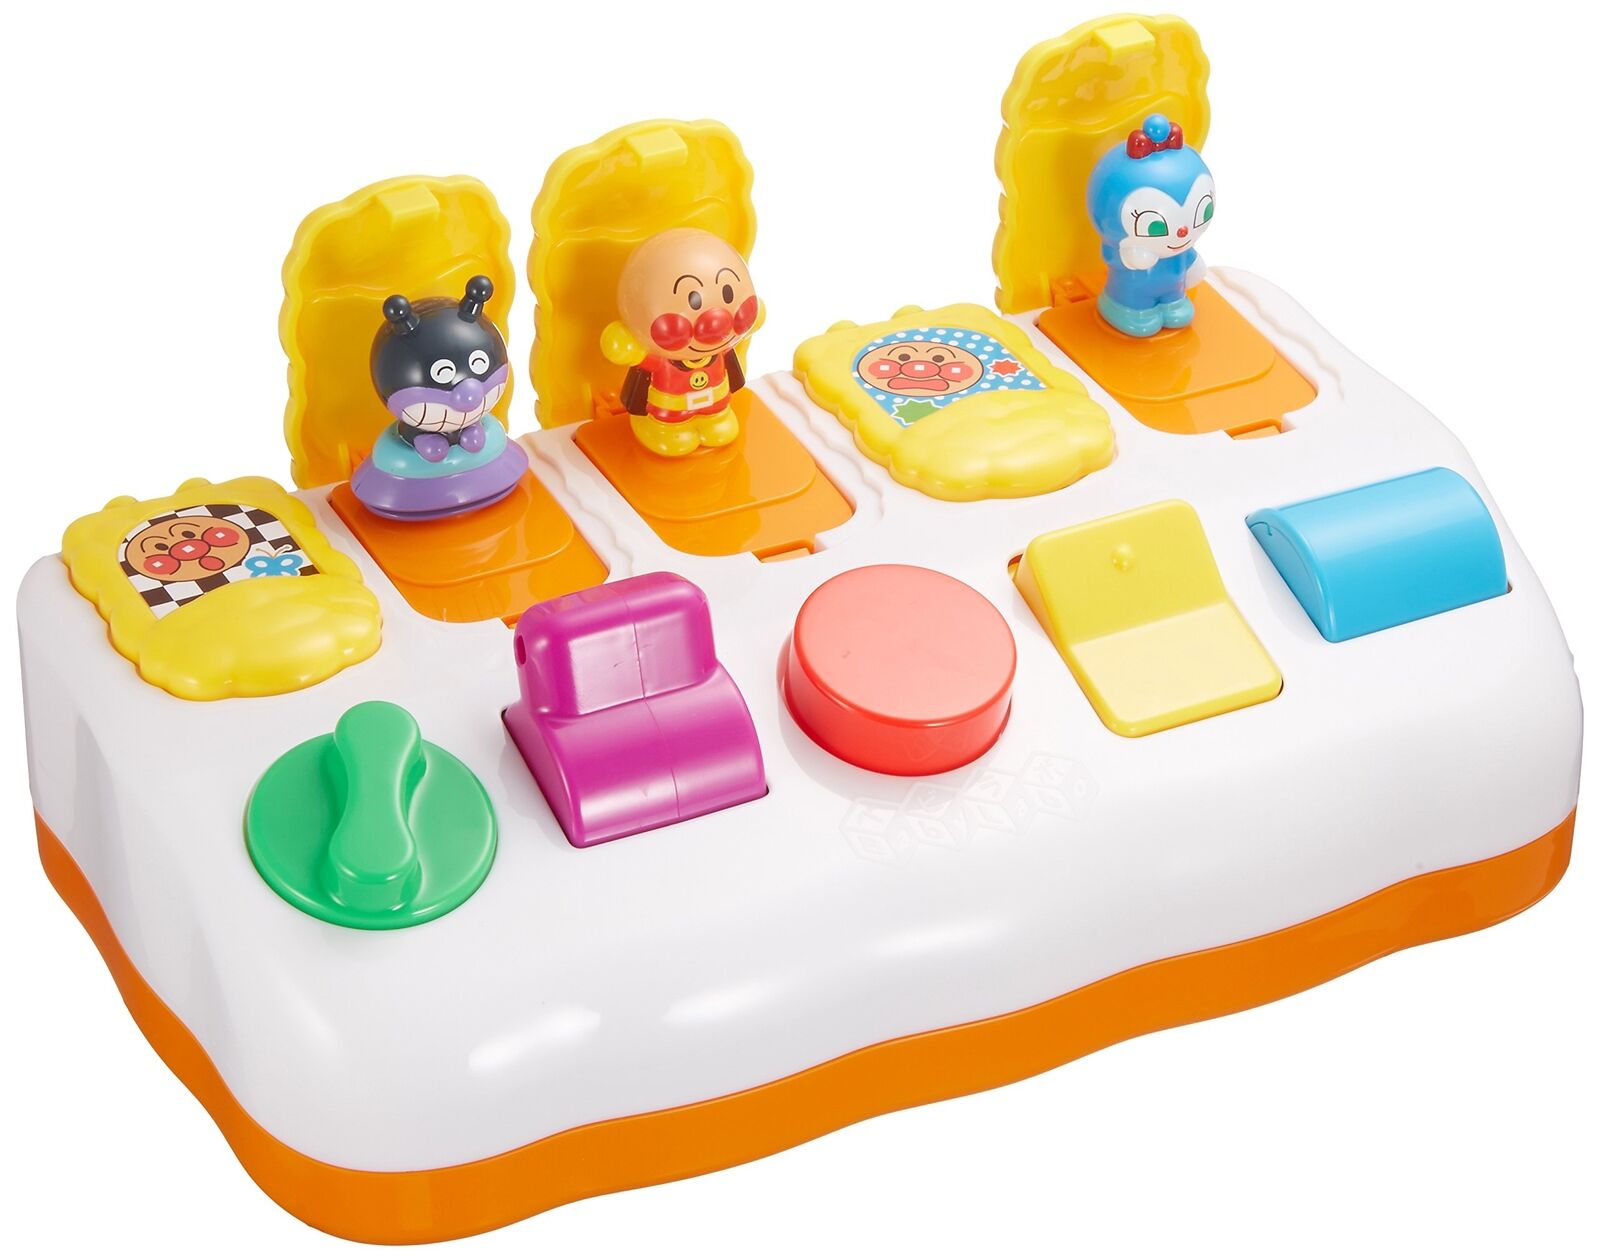 Bandai Babylabo Baby Labo Anpanman Open Pyokon Recommended For Ages 1 And Up